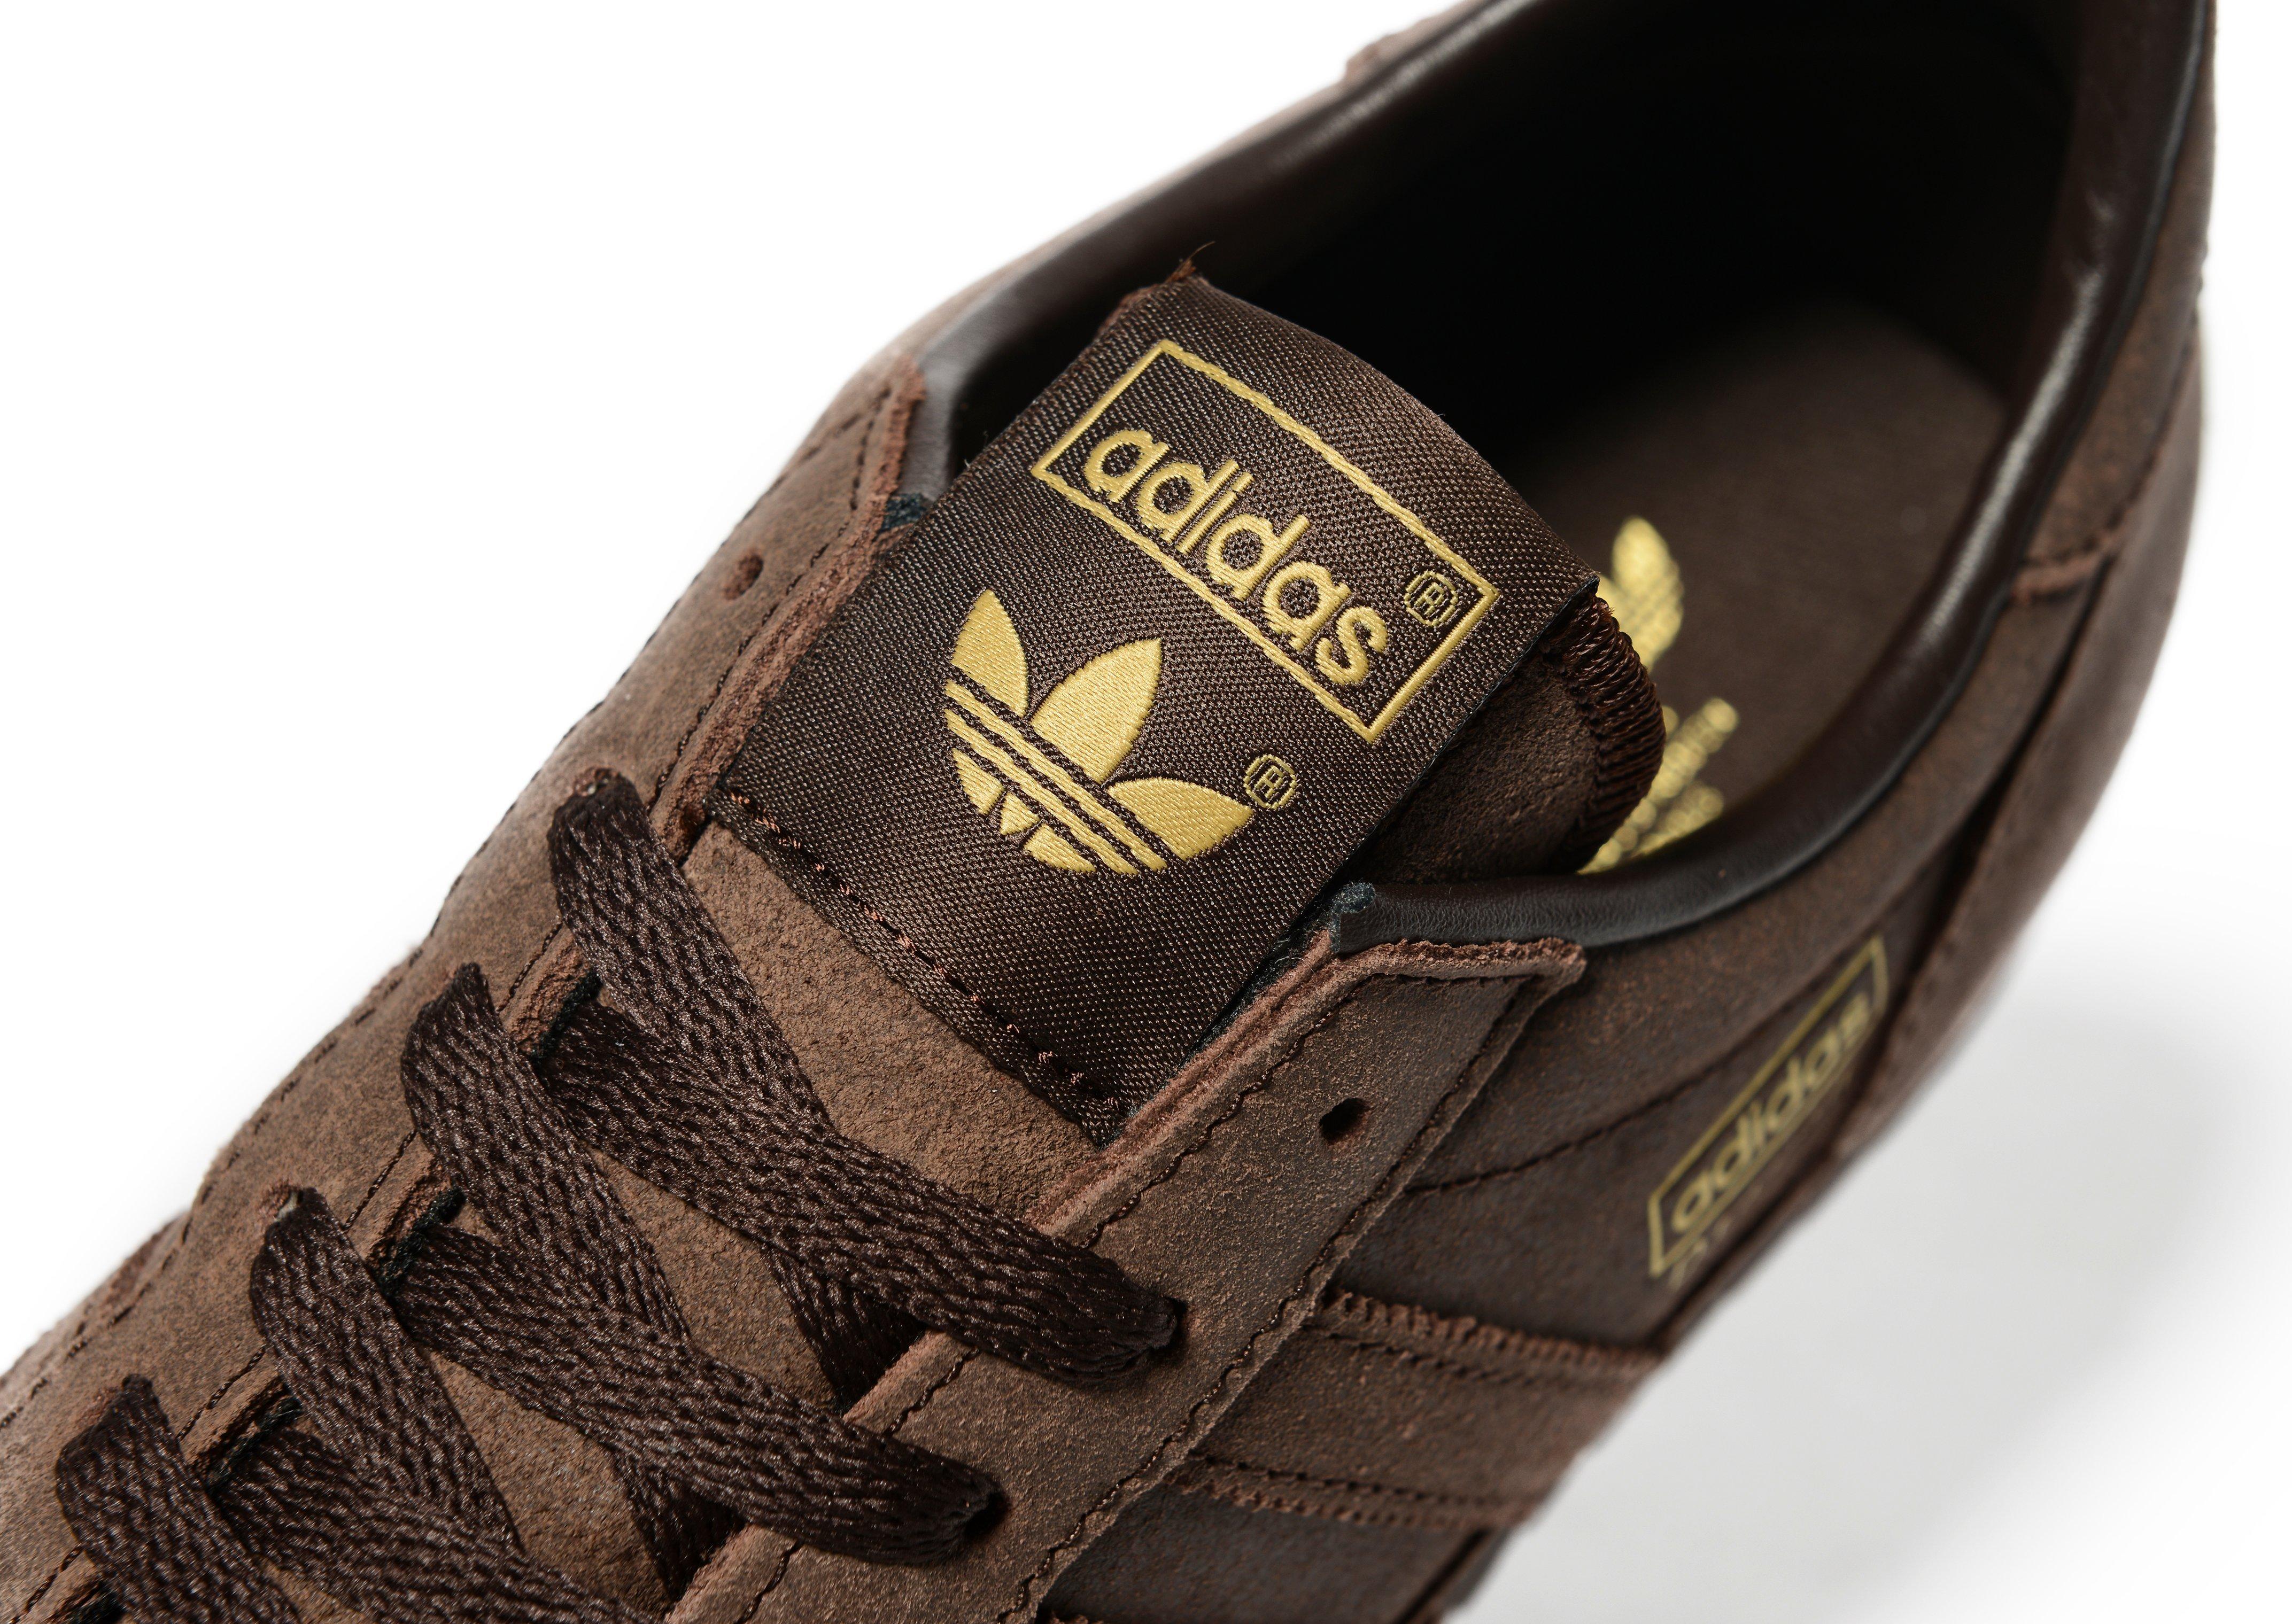 brown leather adidas trainers Online Shopping for Women, Men, Kids Fashion  & Lifestyle|Free Delivery & Returns! -